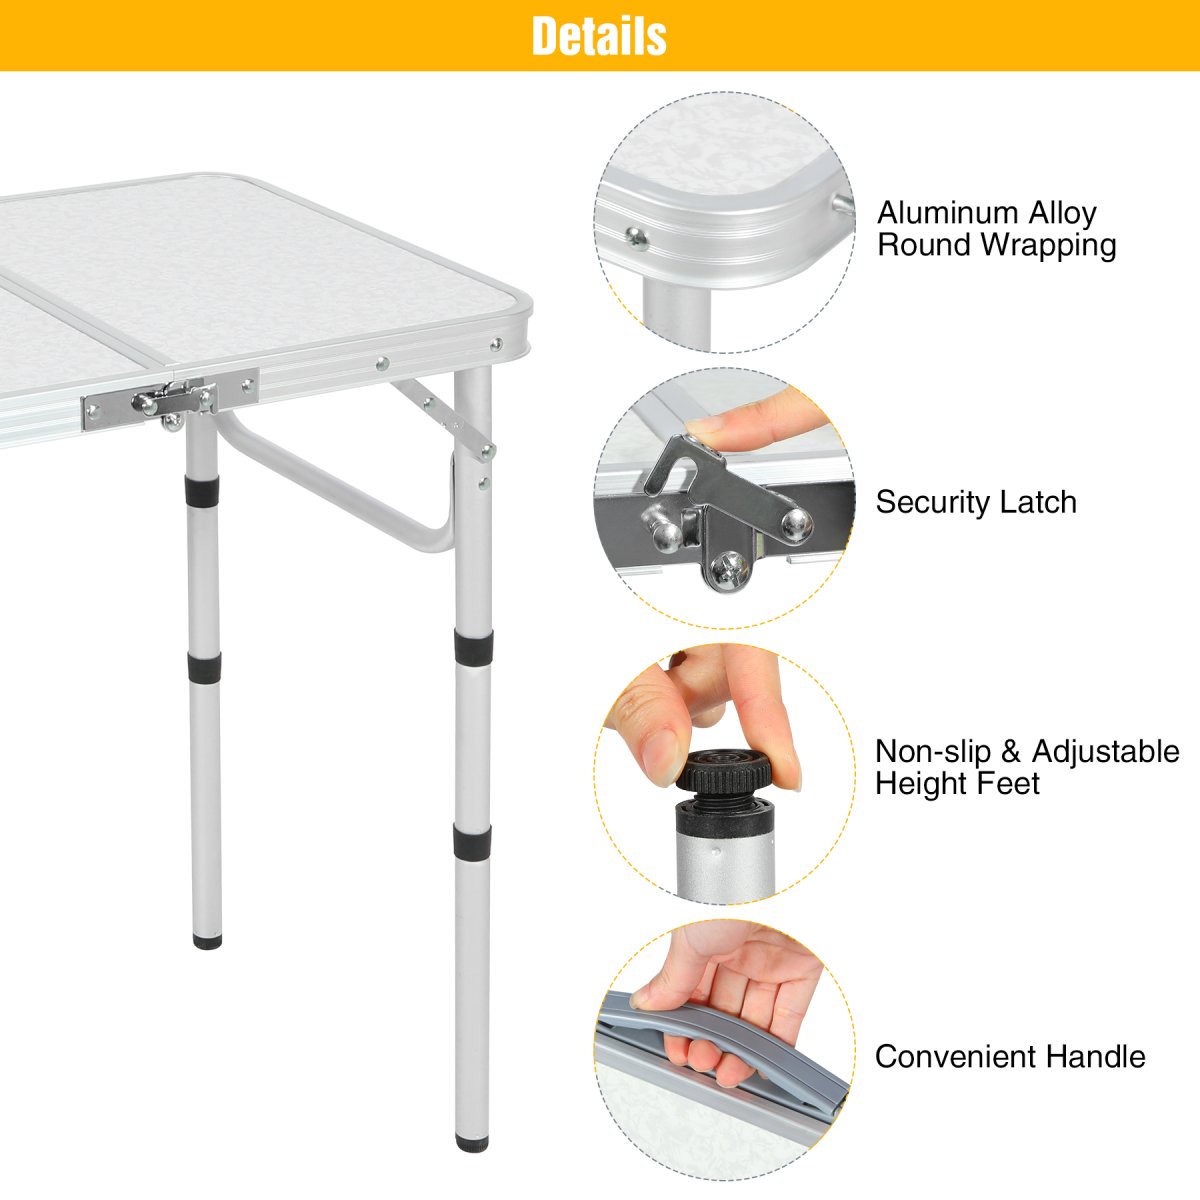 Aluminum Folding Camping Table with Adjustable Height Legs, 2/3/4ft